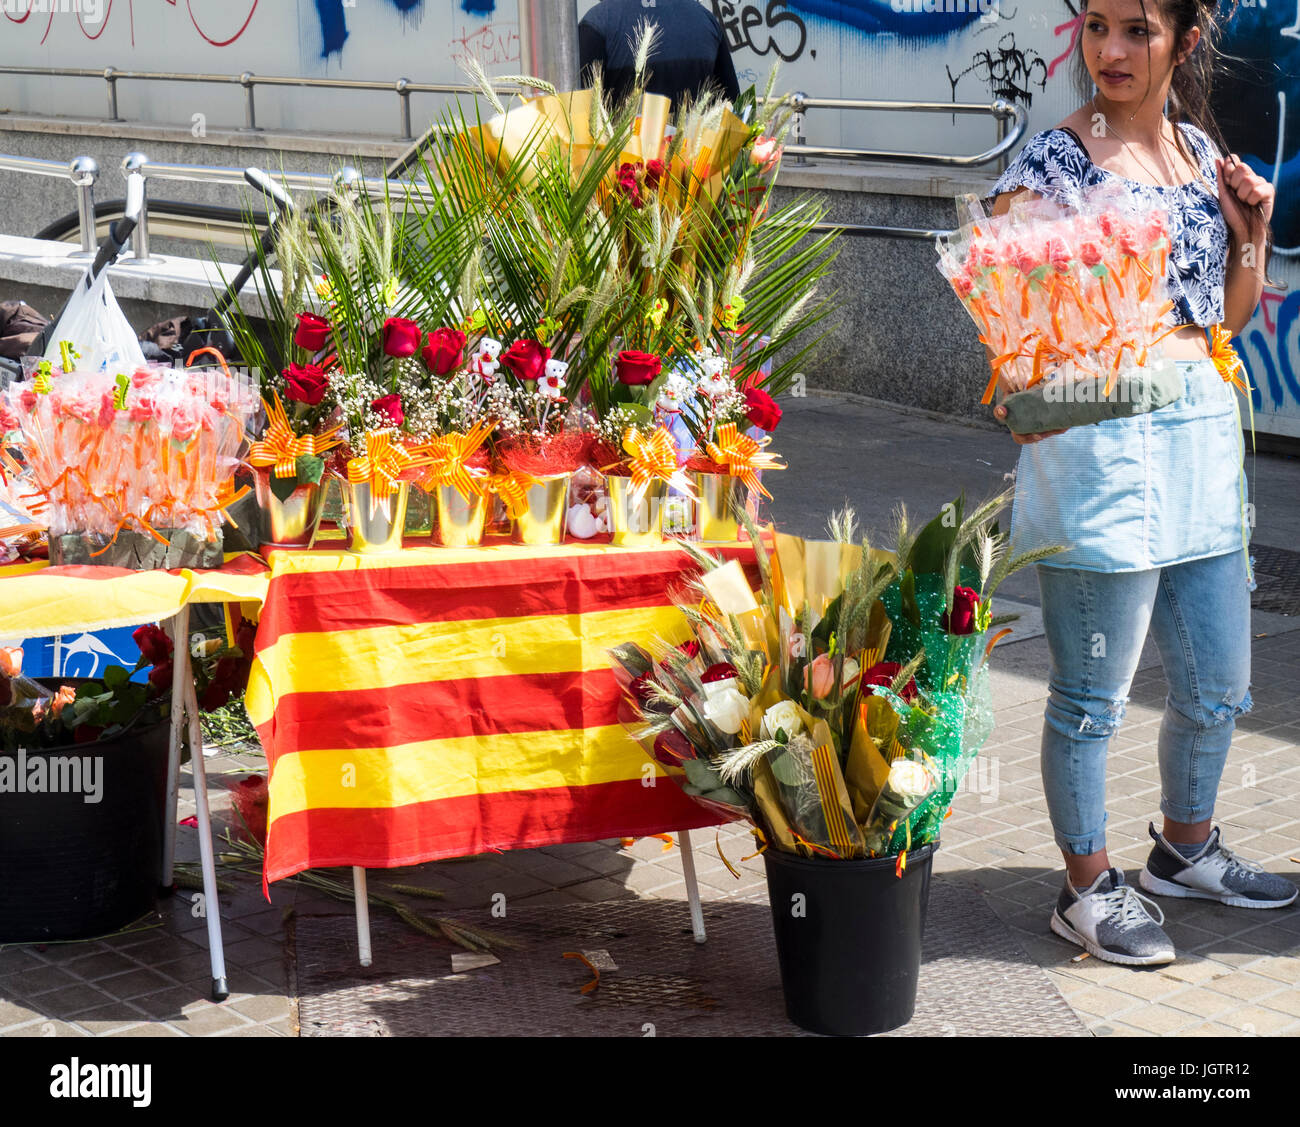 A woman selling red roses on Sant Jordi Day, Barcelona, Spain. Stock Photo